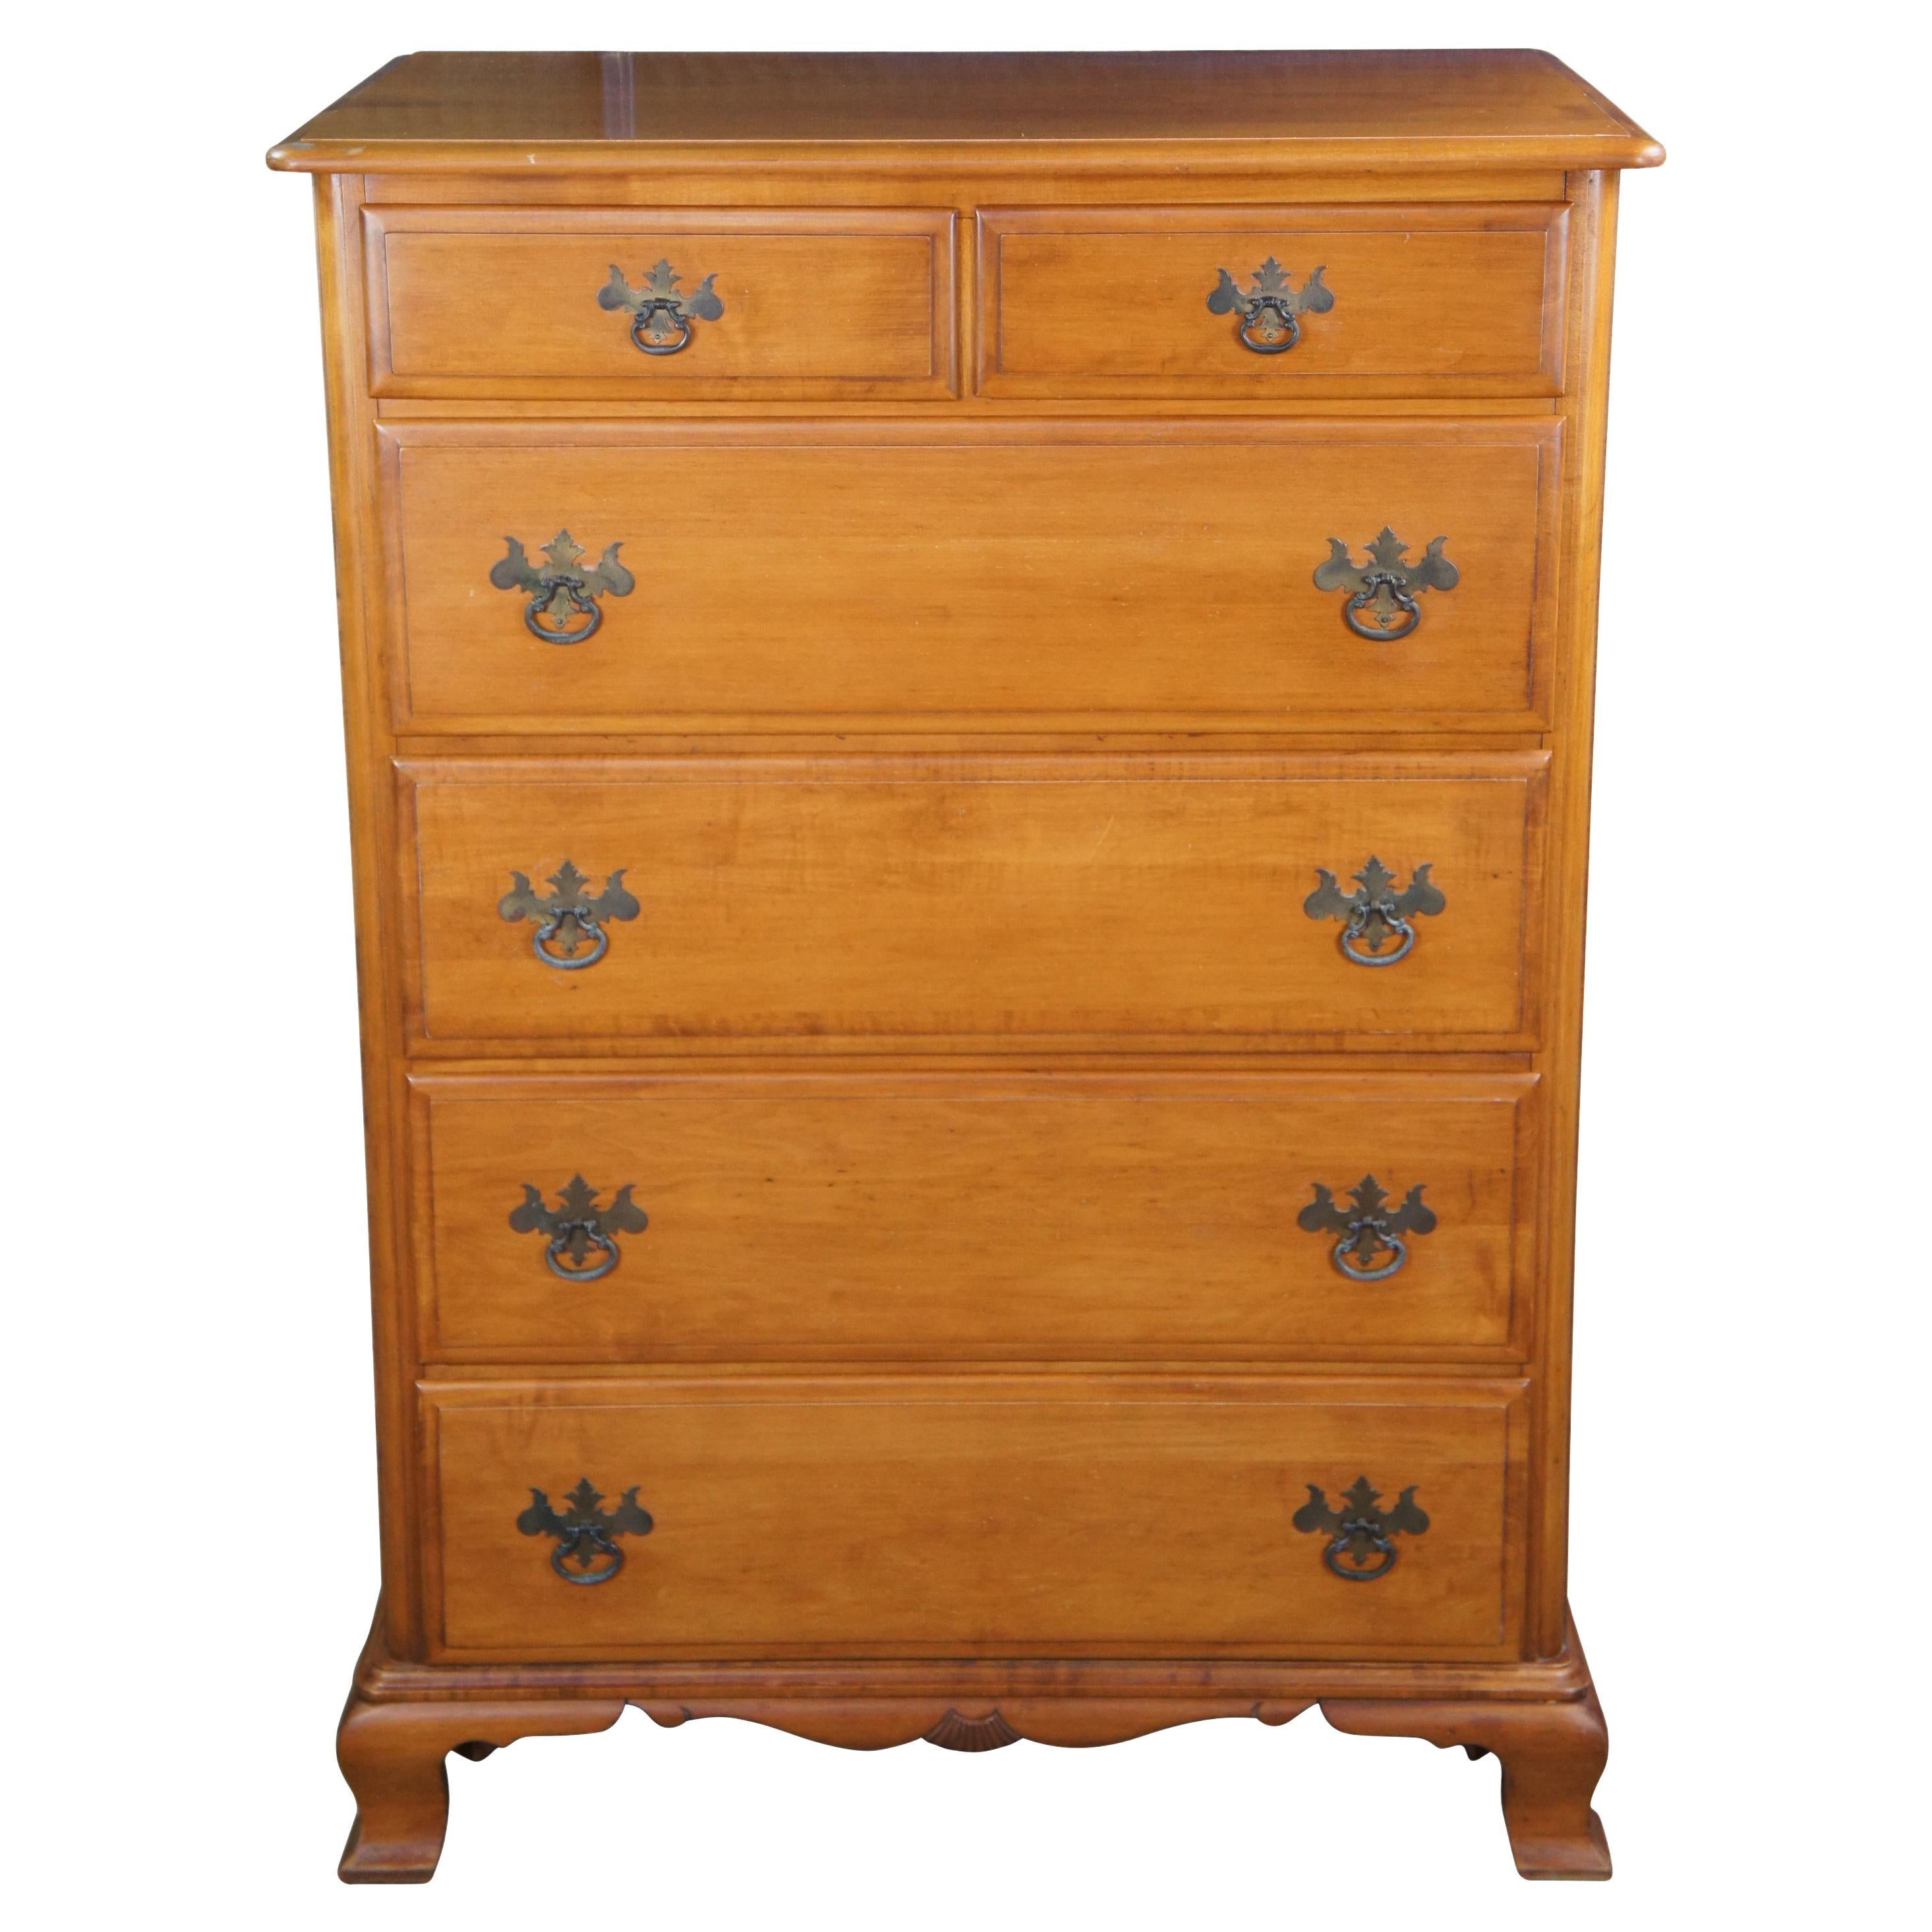 Kling Olde Orchard Maple Colonial Chippendale Tallboy Dresser Chest of Drawers